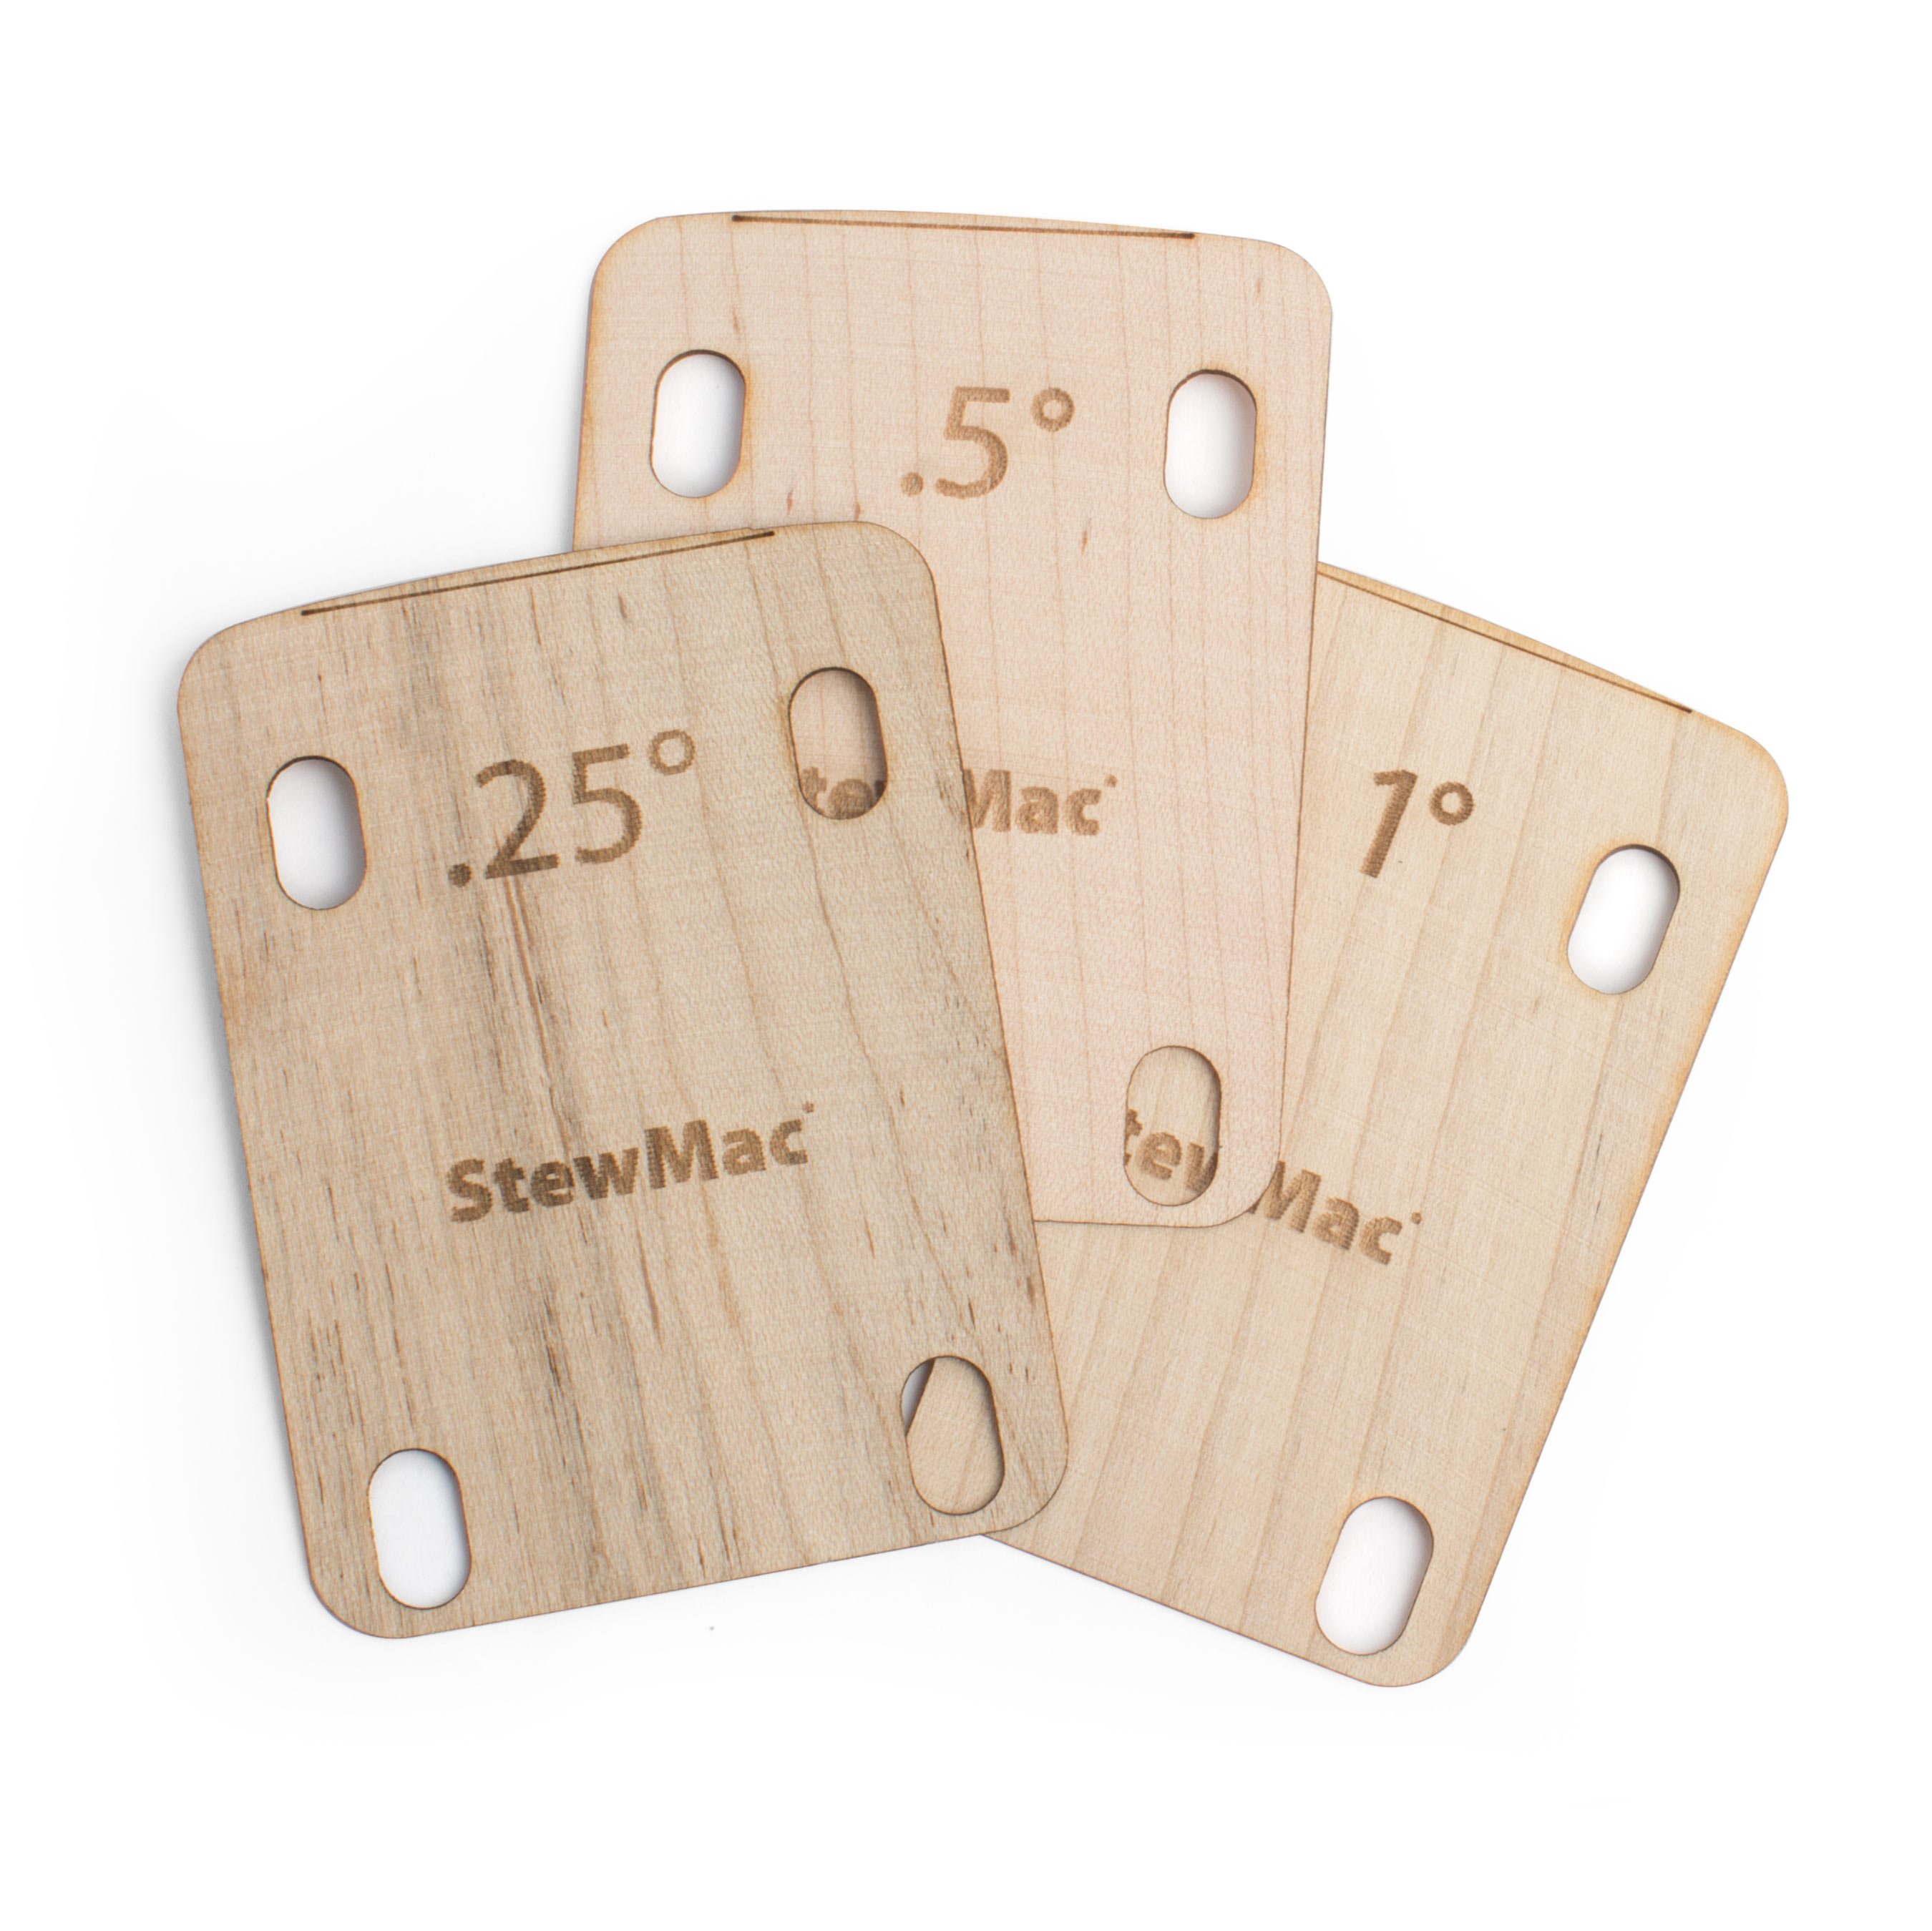 StewMac Neck Shims for Guitar